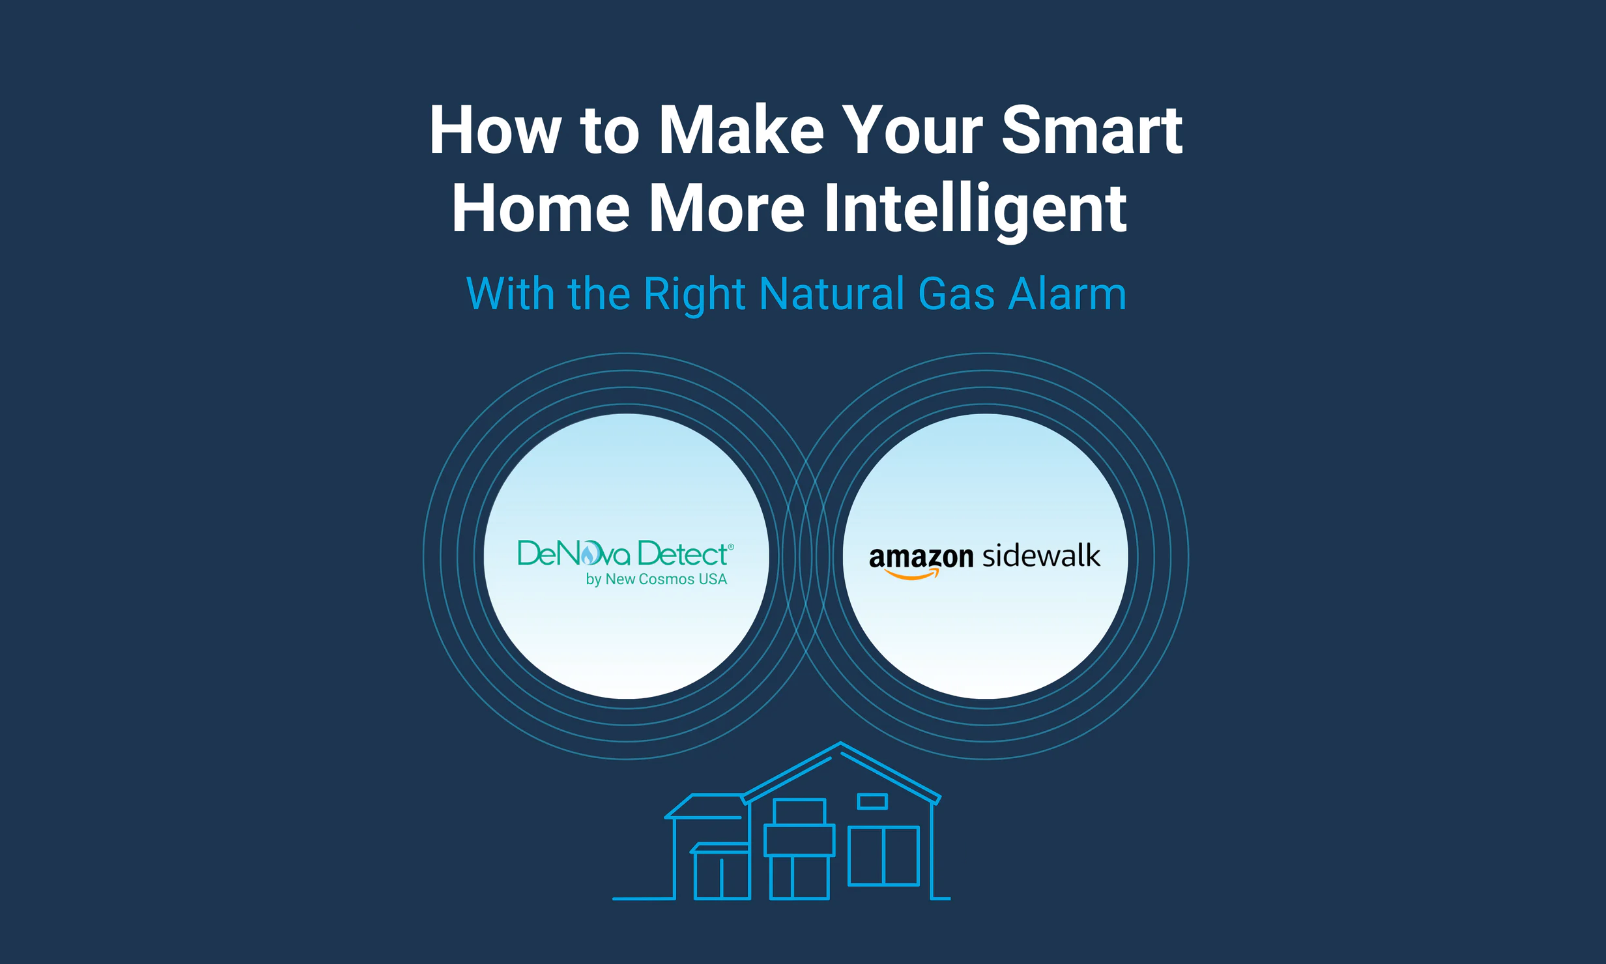 How to Make Your Smart Home More Intelligent With the Right Natural Gas Alarm